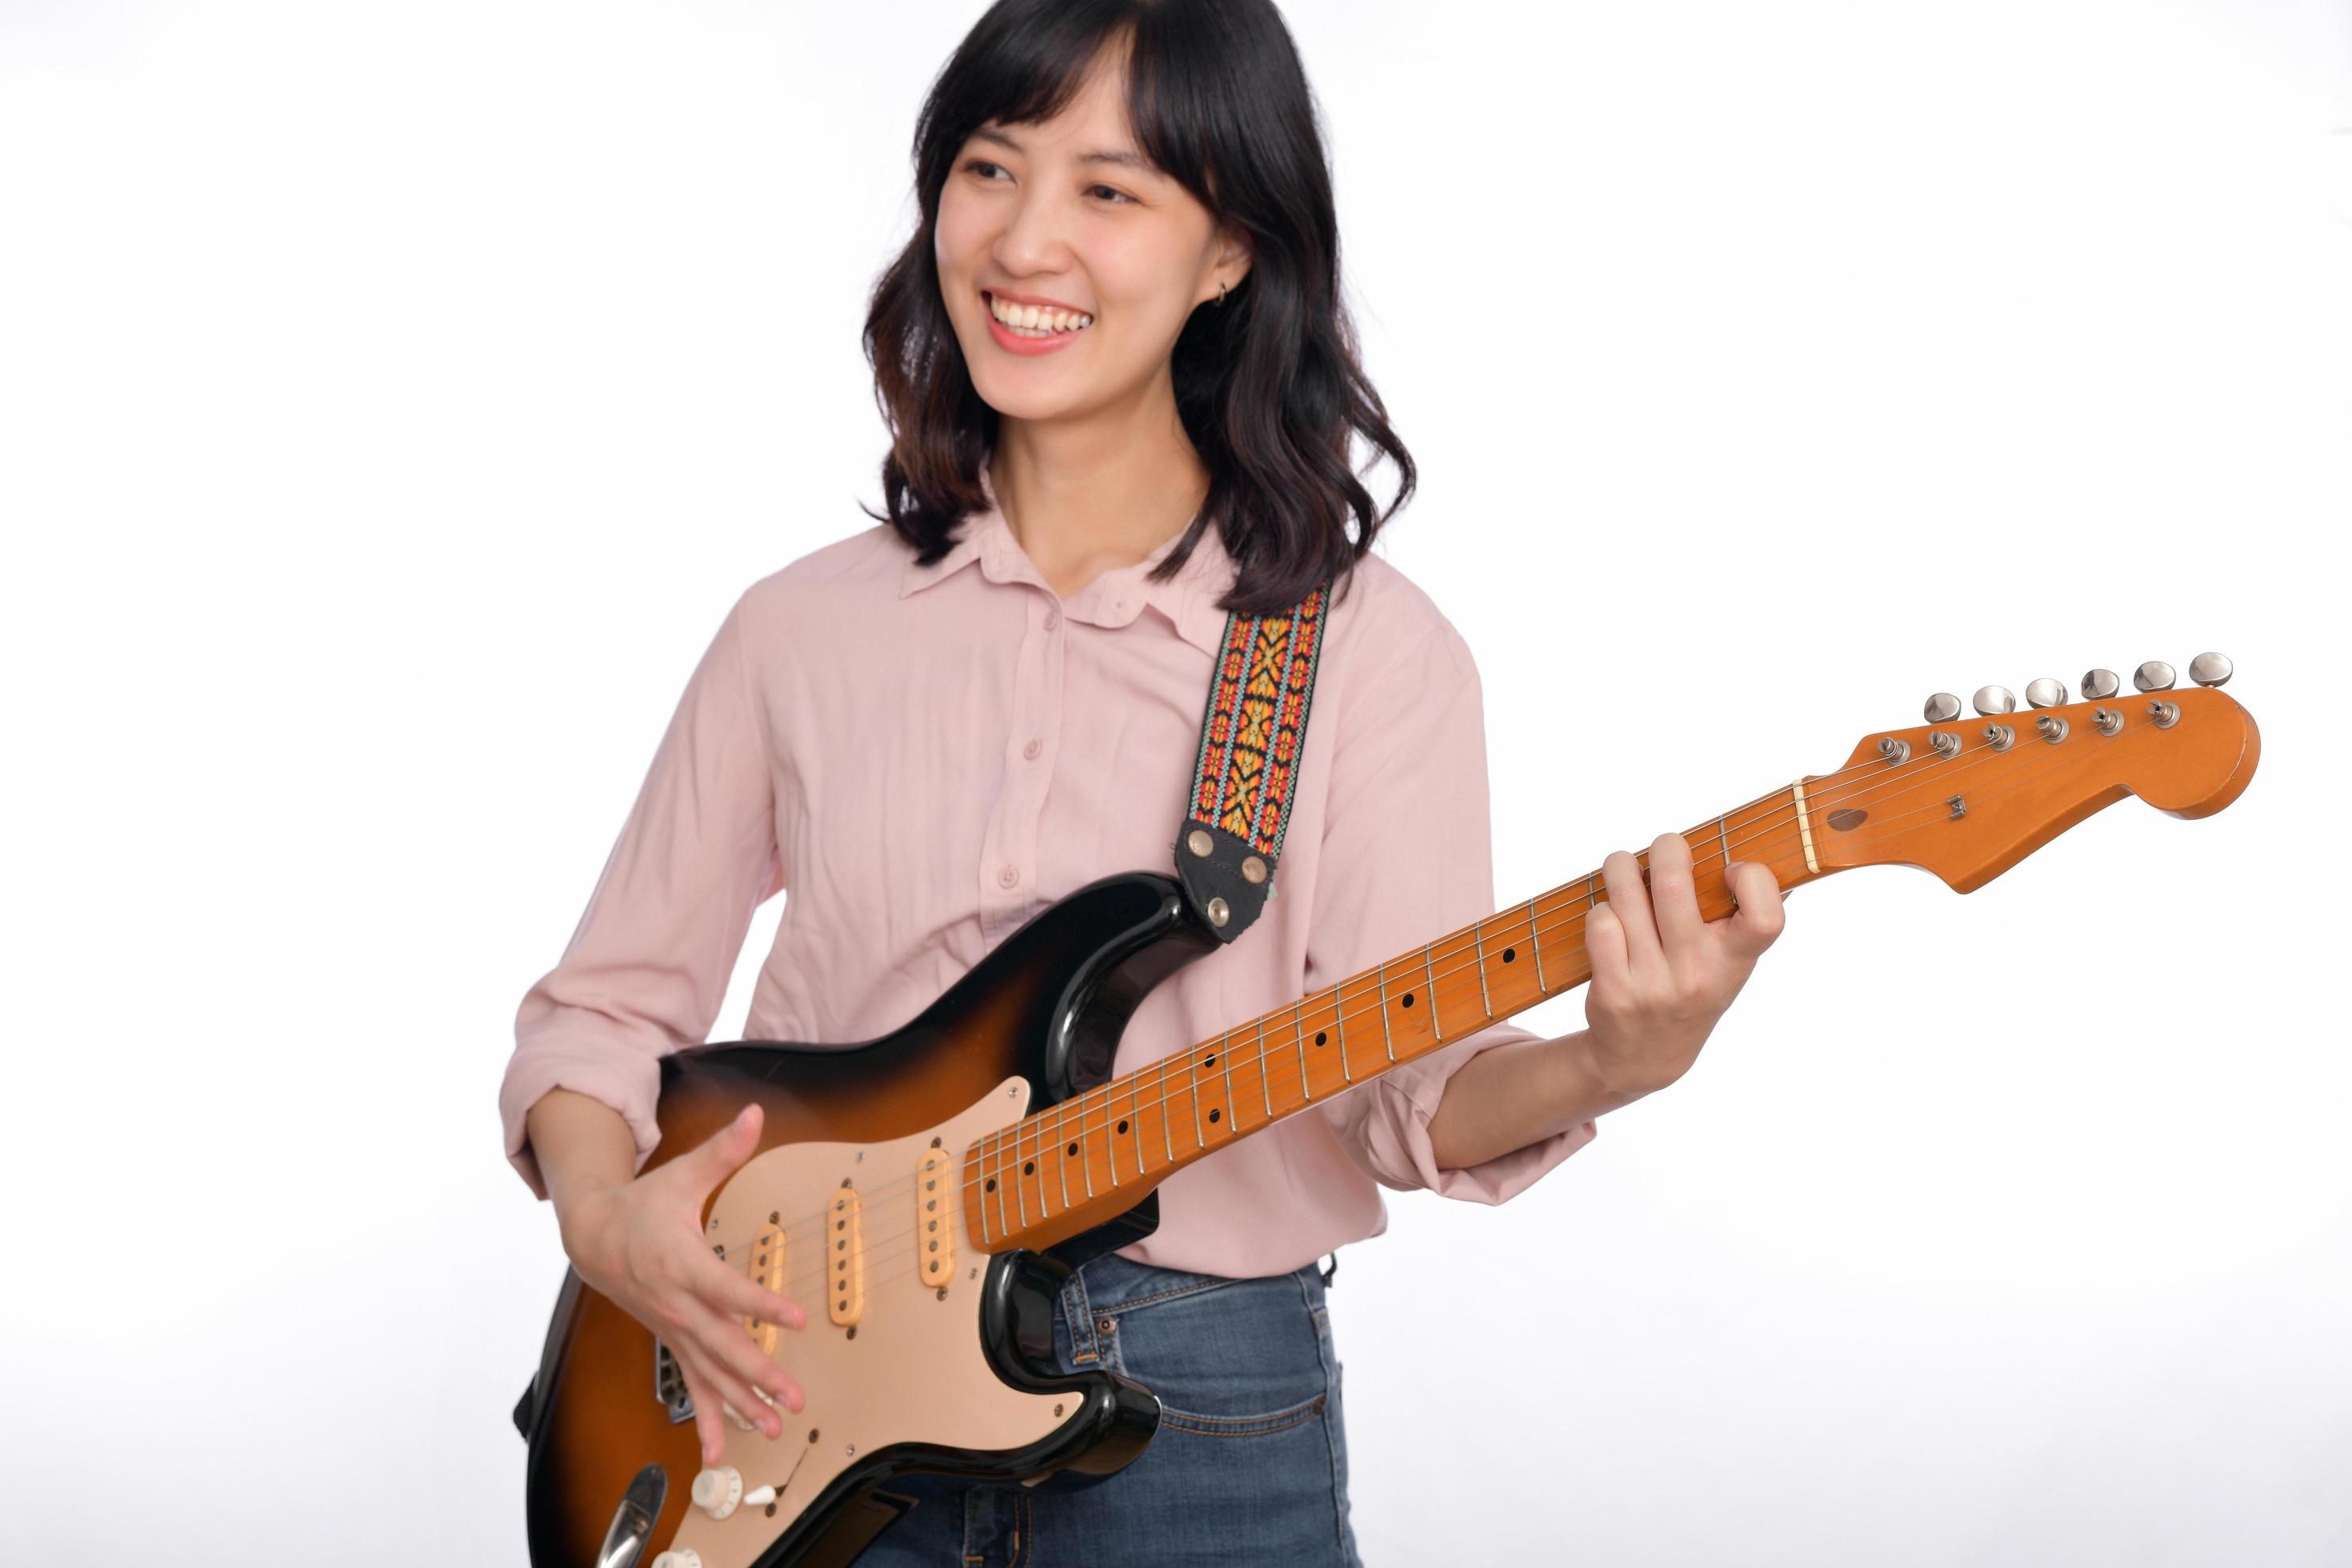 https://static.vecteezy.com/system/resources/previews/019/765/017/large_2x/asian-woman-playing-a-vintage-sunburst-electric-guitar-isolated-on-white-background-free-photo.jpg